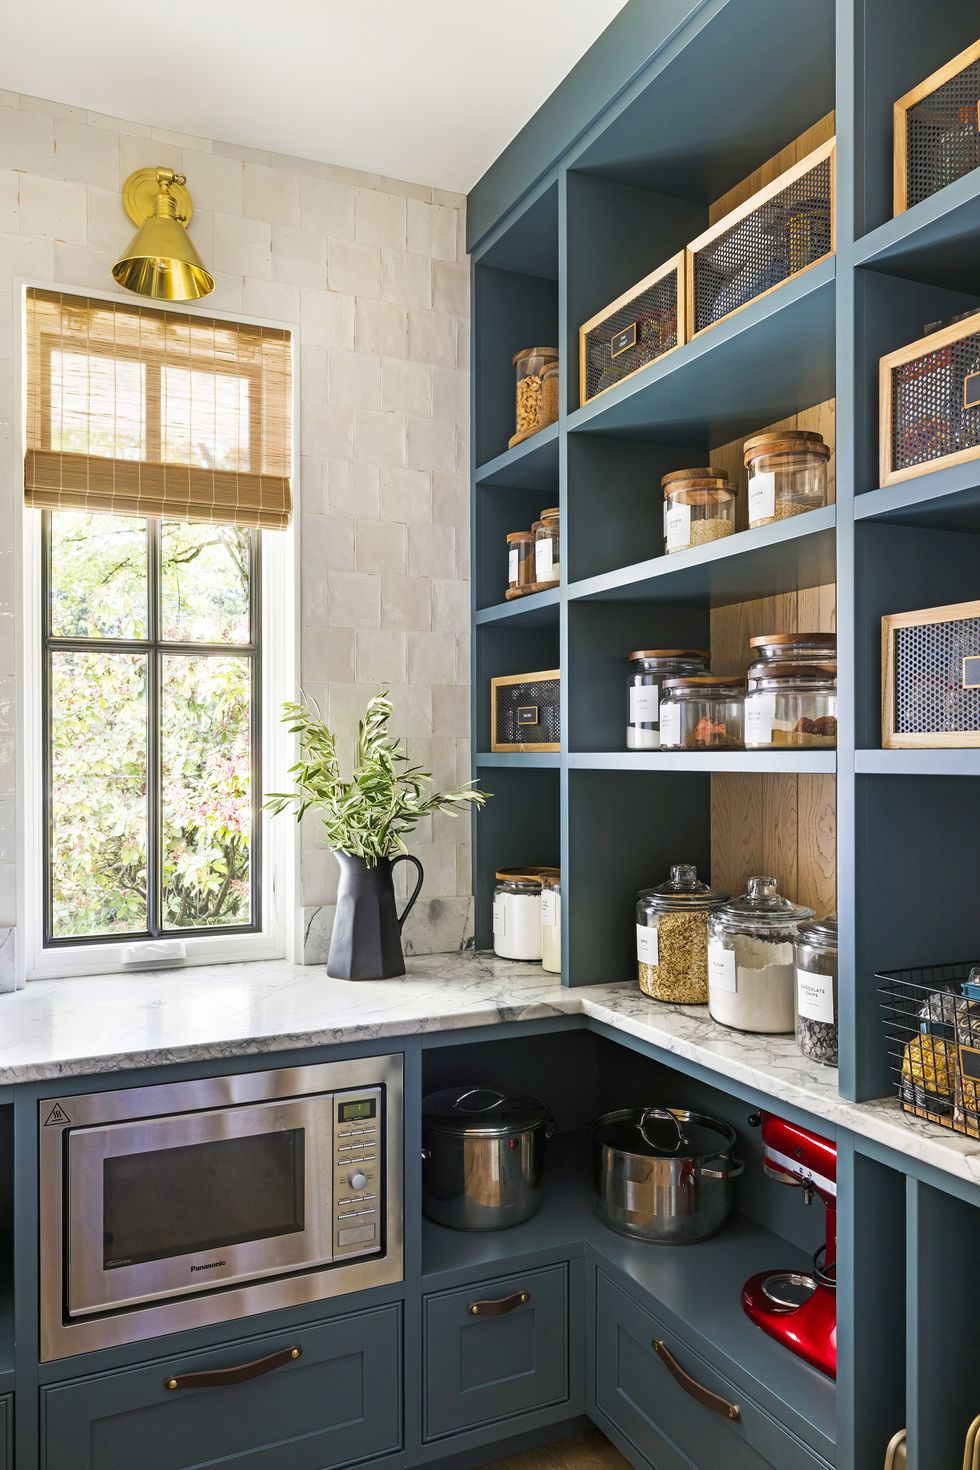 22 Small Kitchen Ideas To Make The Most Of Your Space